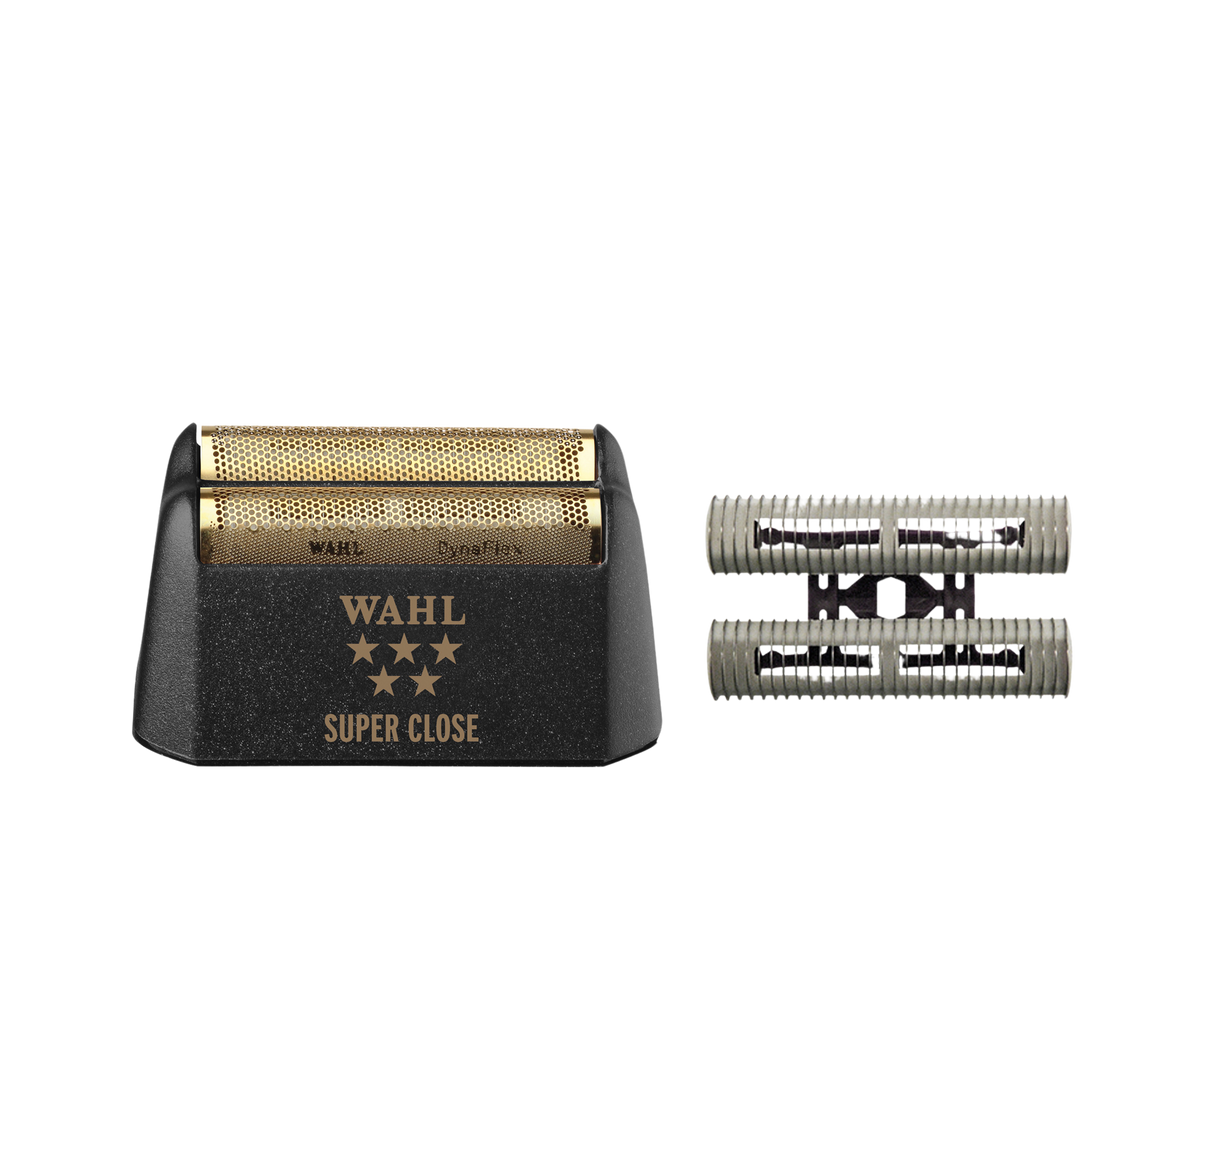 Wahl 5-Star Finale Replacement Foil and Cutter Bar Assembly